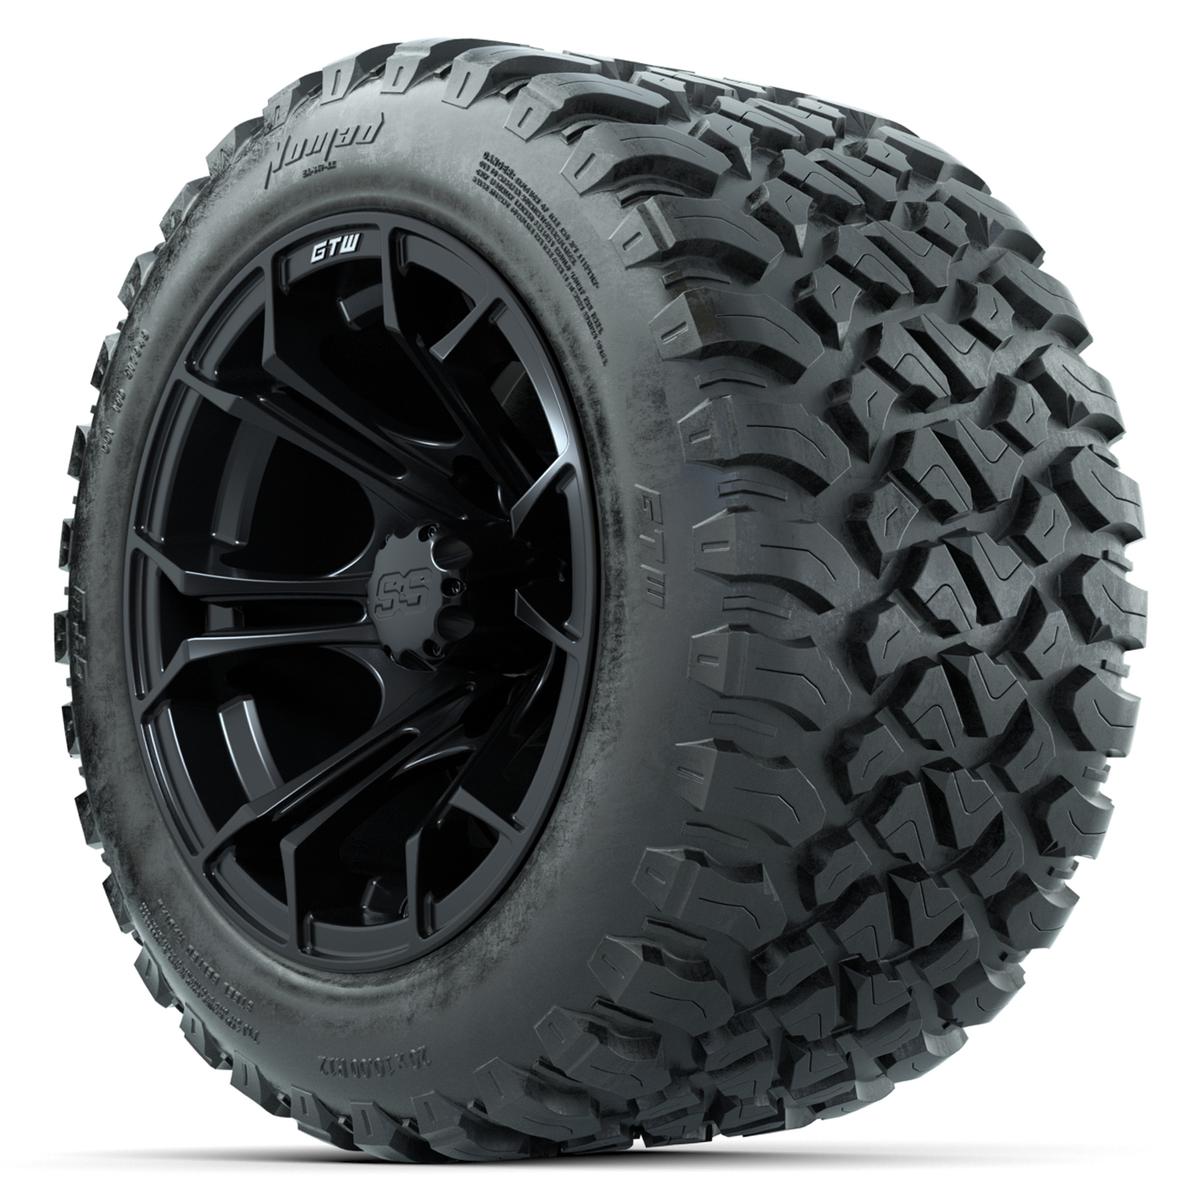 GTW Spyder Matte Black 12 in Wheels with 20x10-R12 GTW Nomad All-Terrain Tires – Full Set